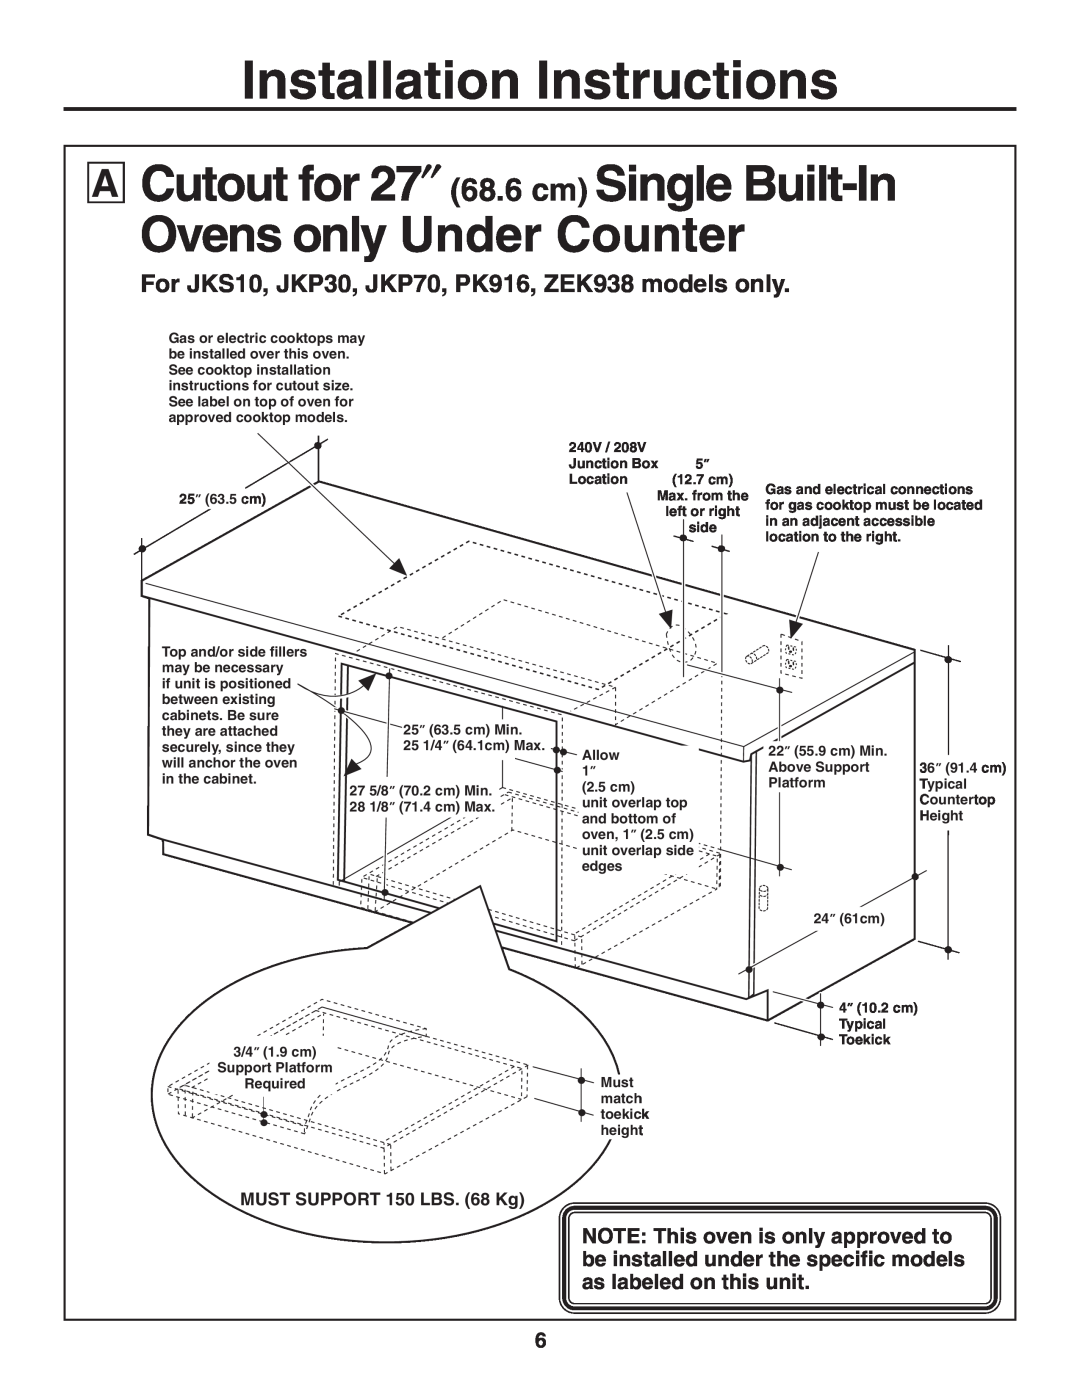 GE r08654v-1 Cutout for 27″ 68.6 cm Single Built-In Ovens only Under Counter, Installation Instructions 